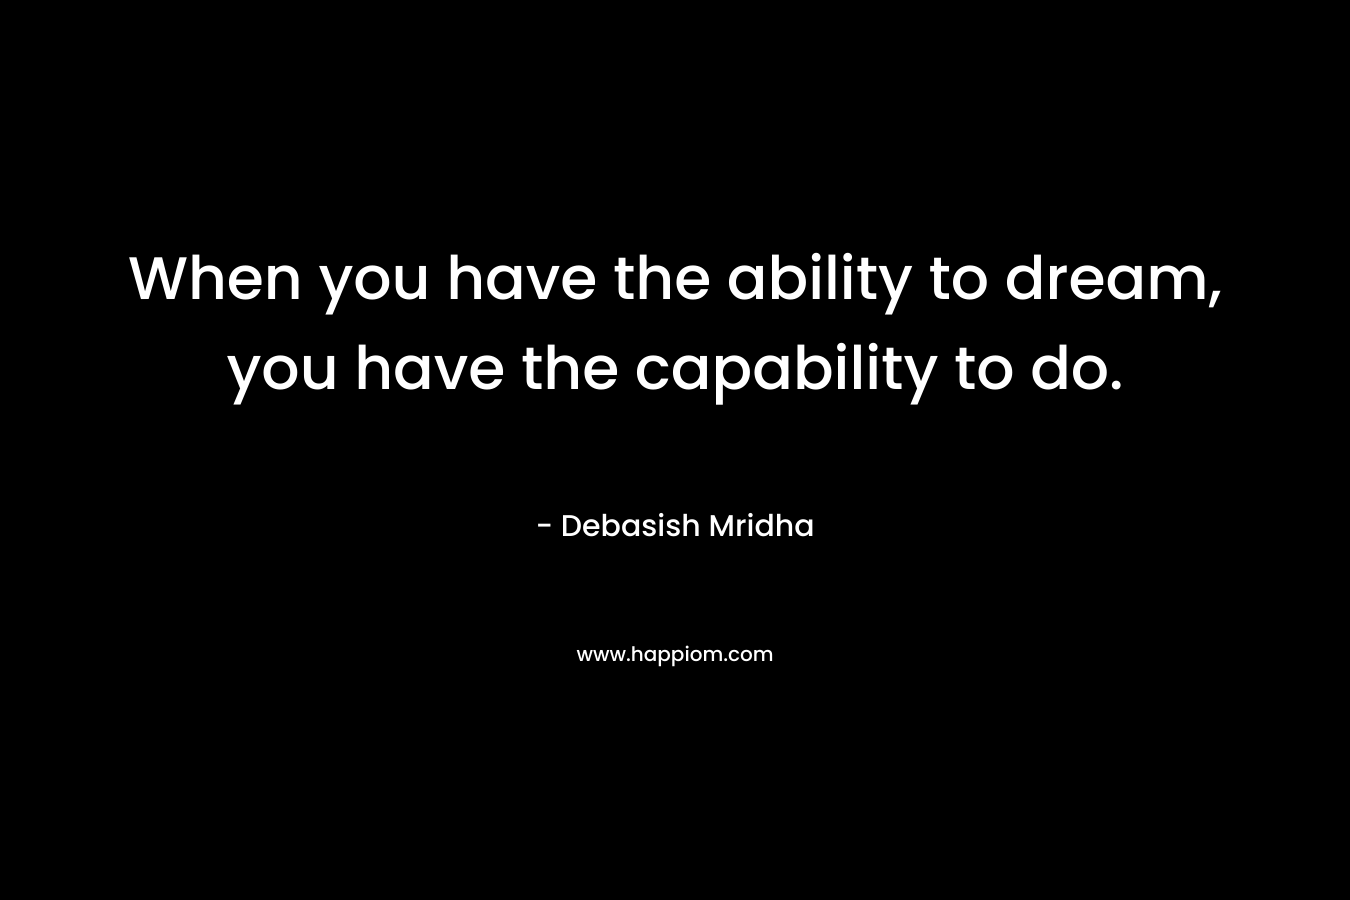 When you have the ability to dream, you have the capability to do. – Debasish Mridha